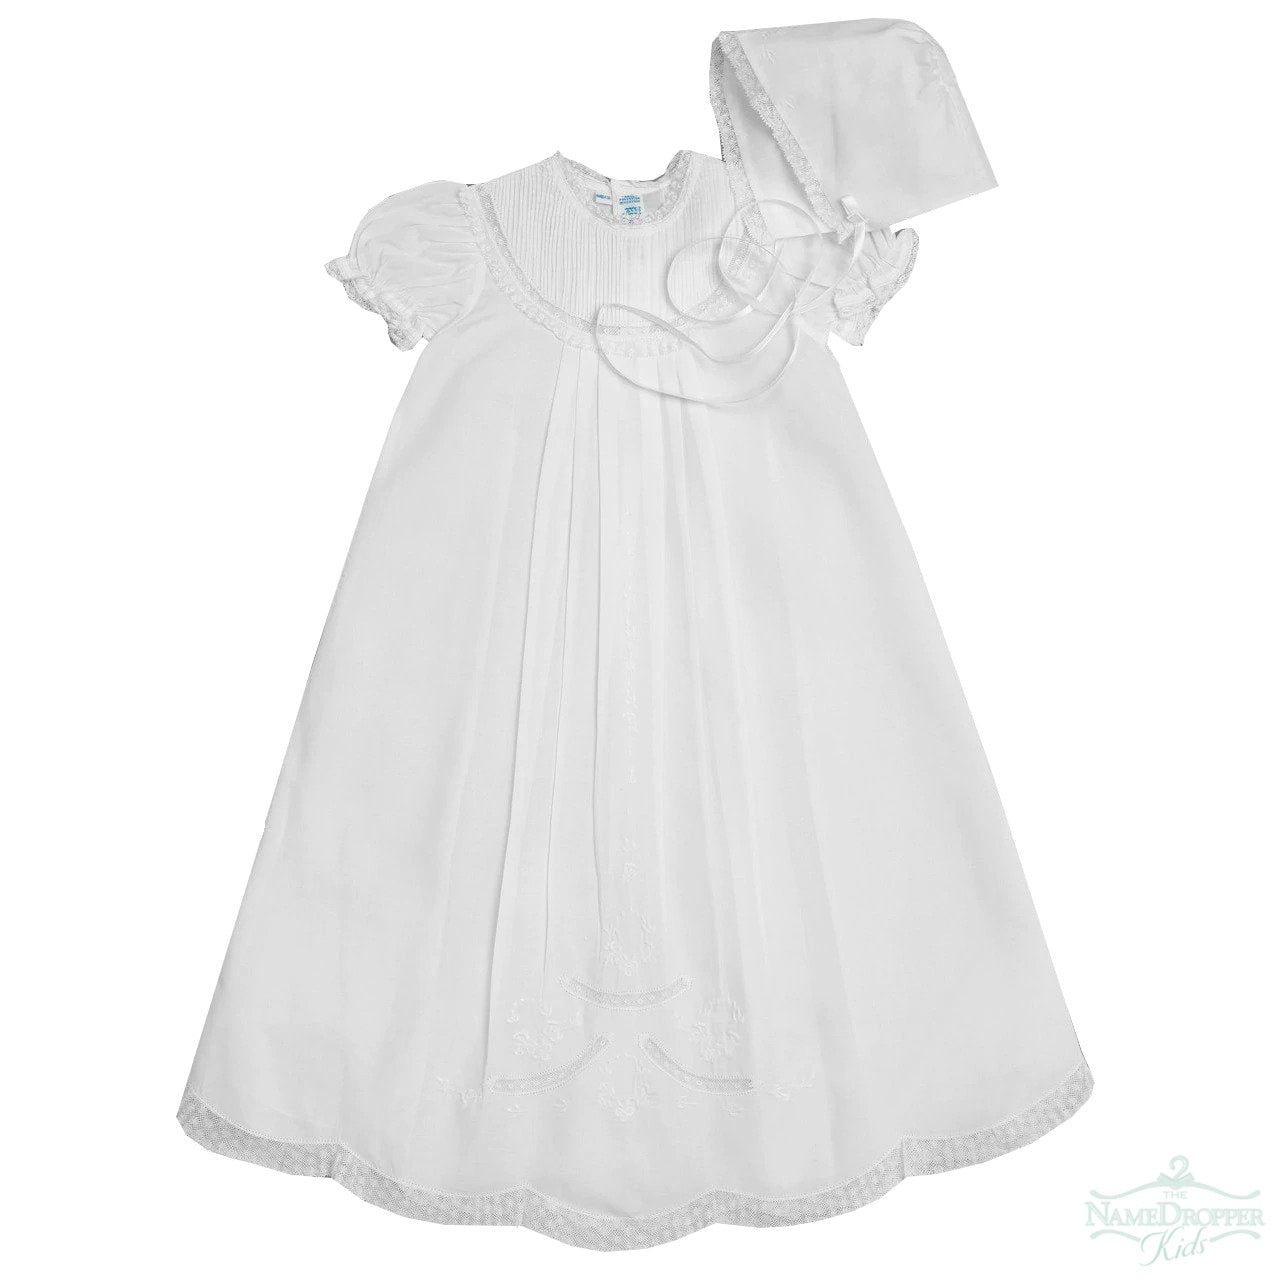 Feltman Brothers Girls Pintucked Yoke Special Occasion Set White 5916